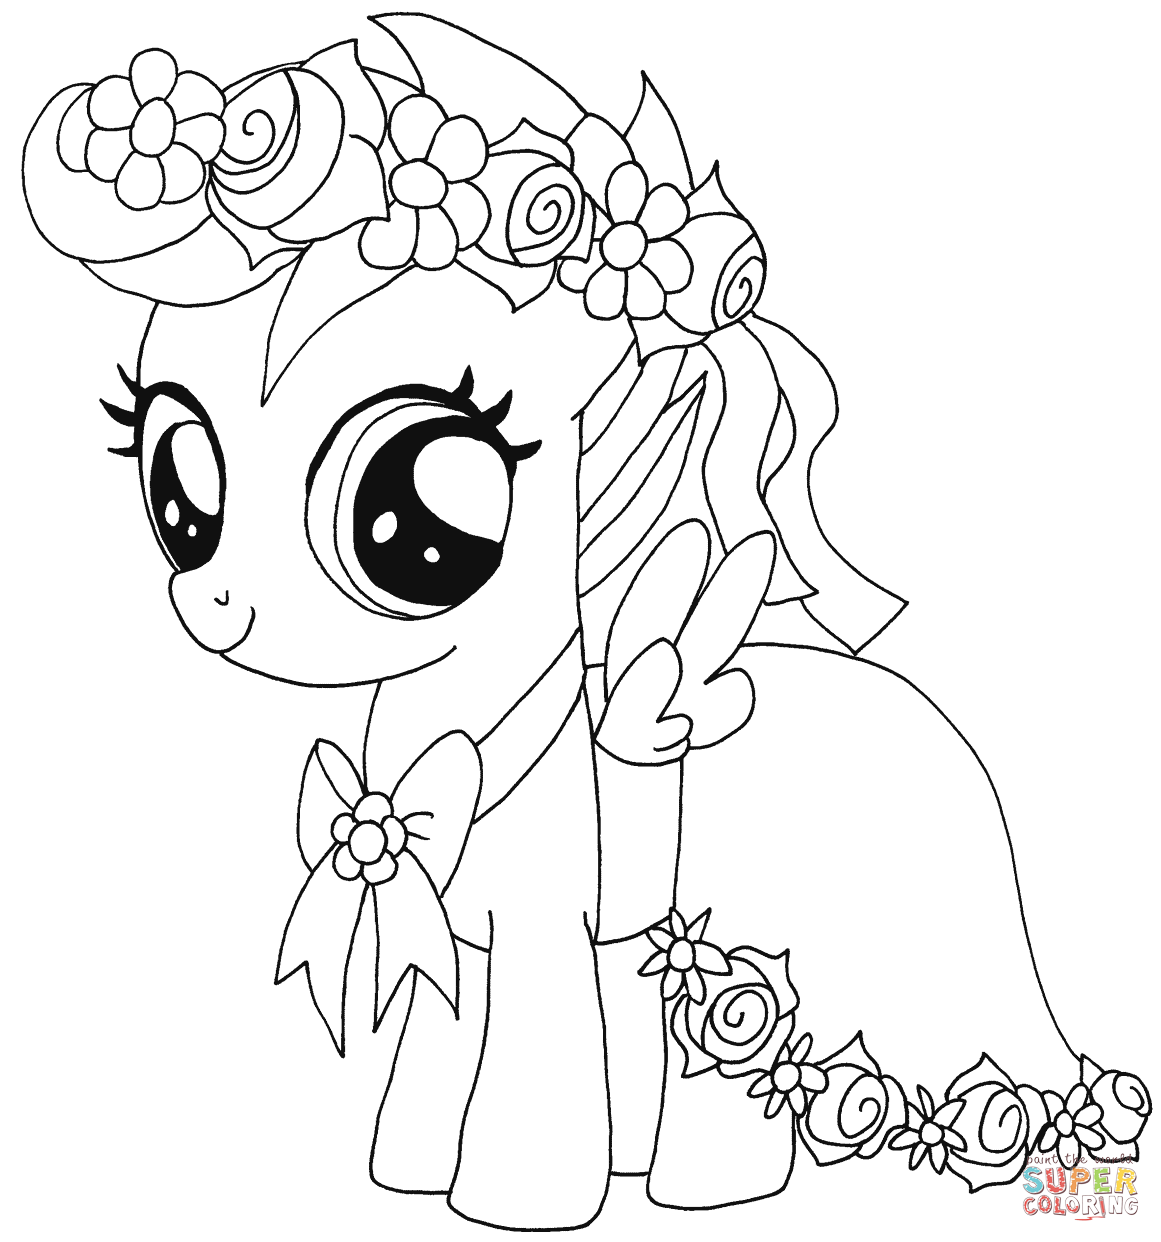 My Little Pony Scootaloo coloring page | Free Printable Coloring Pages